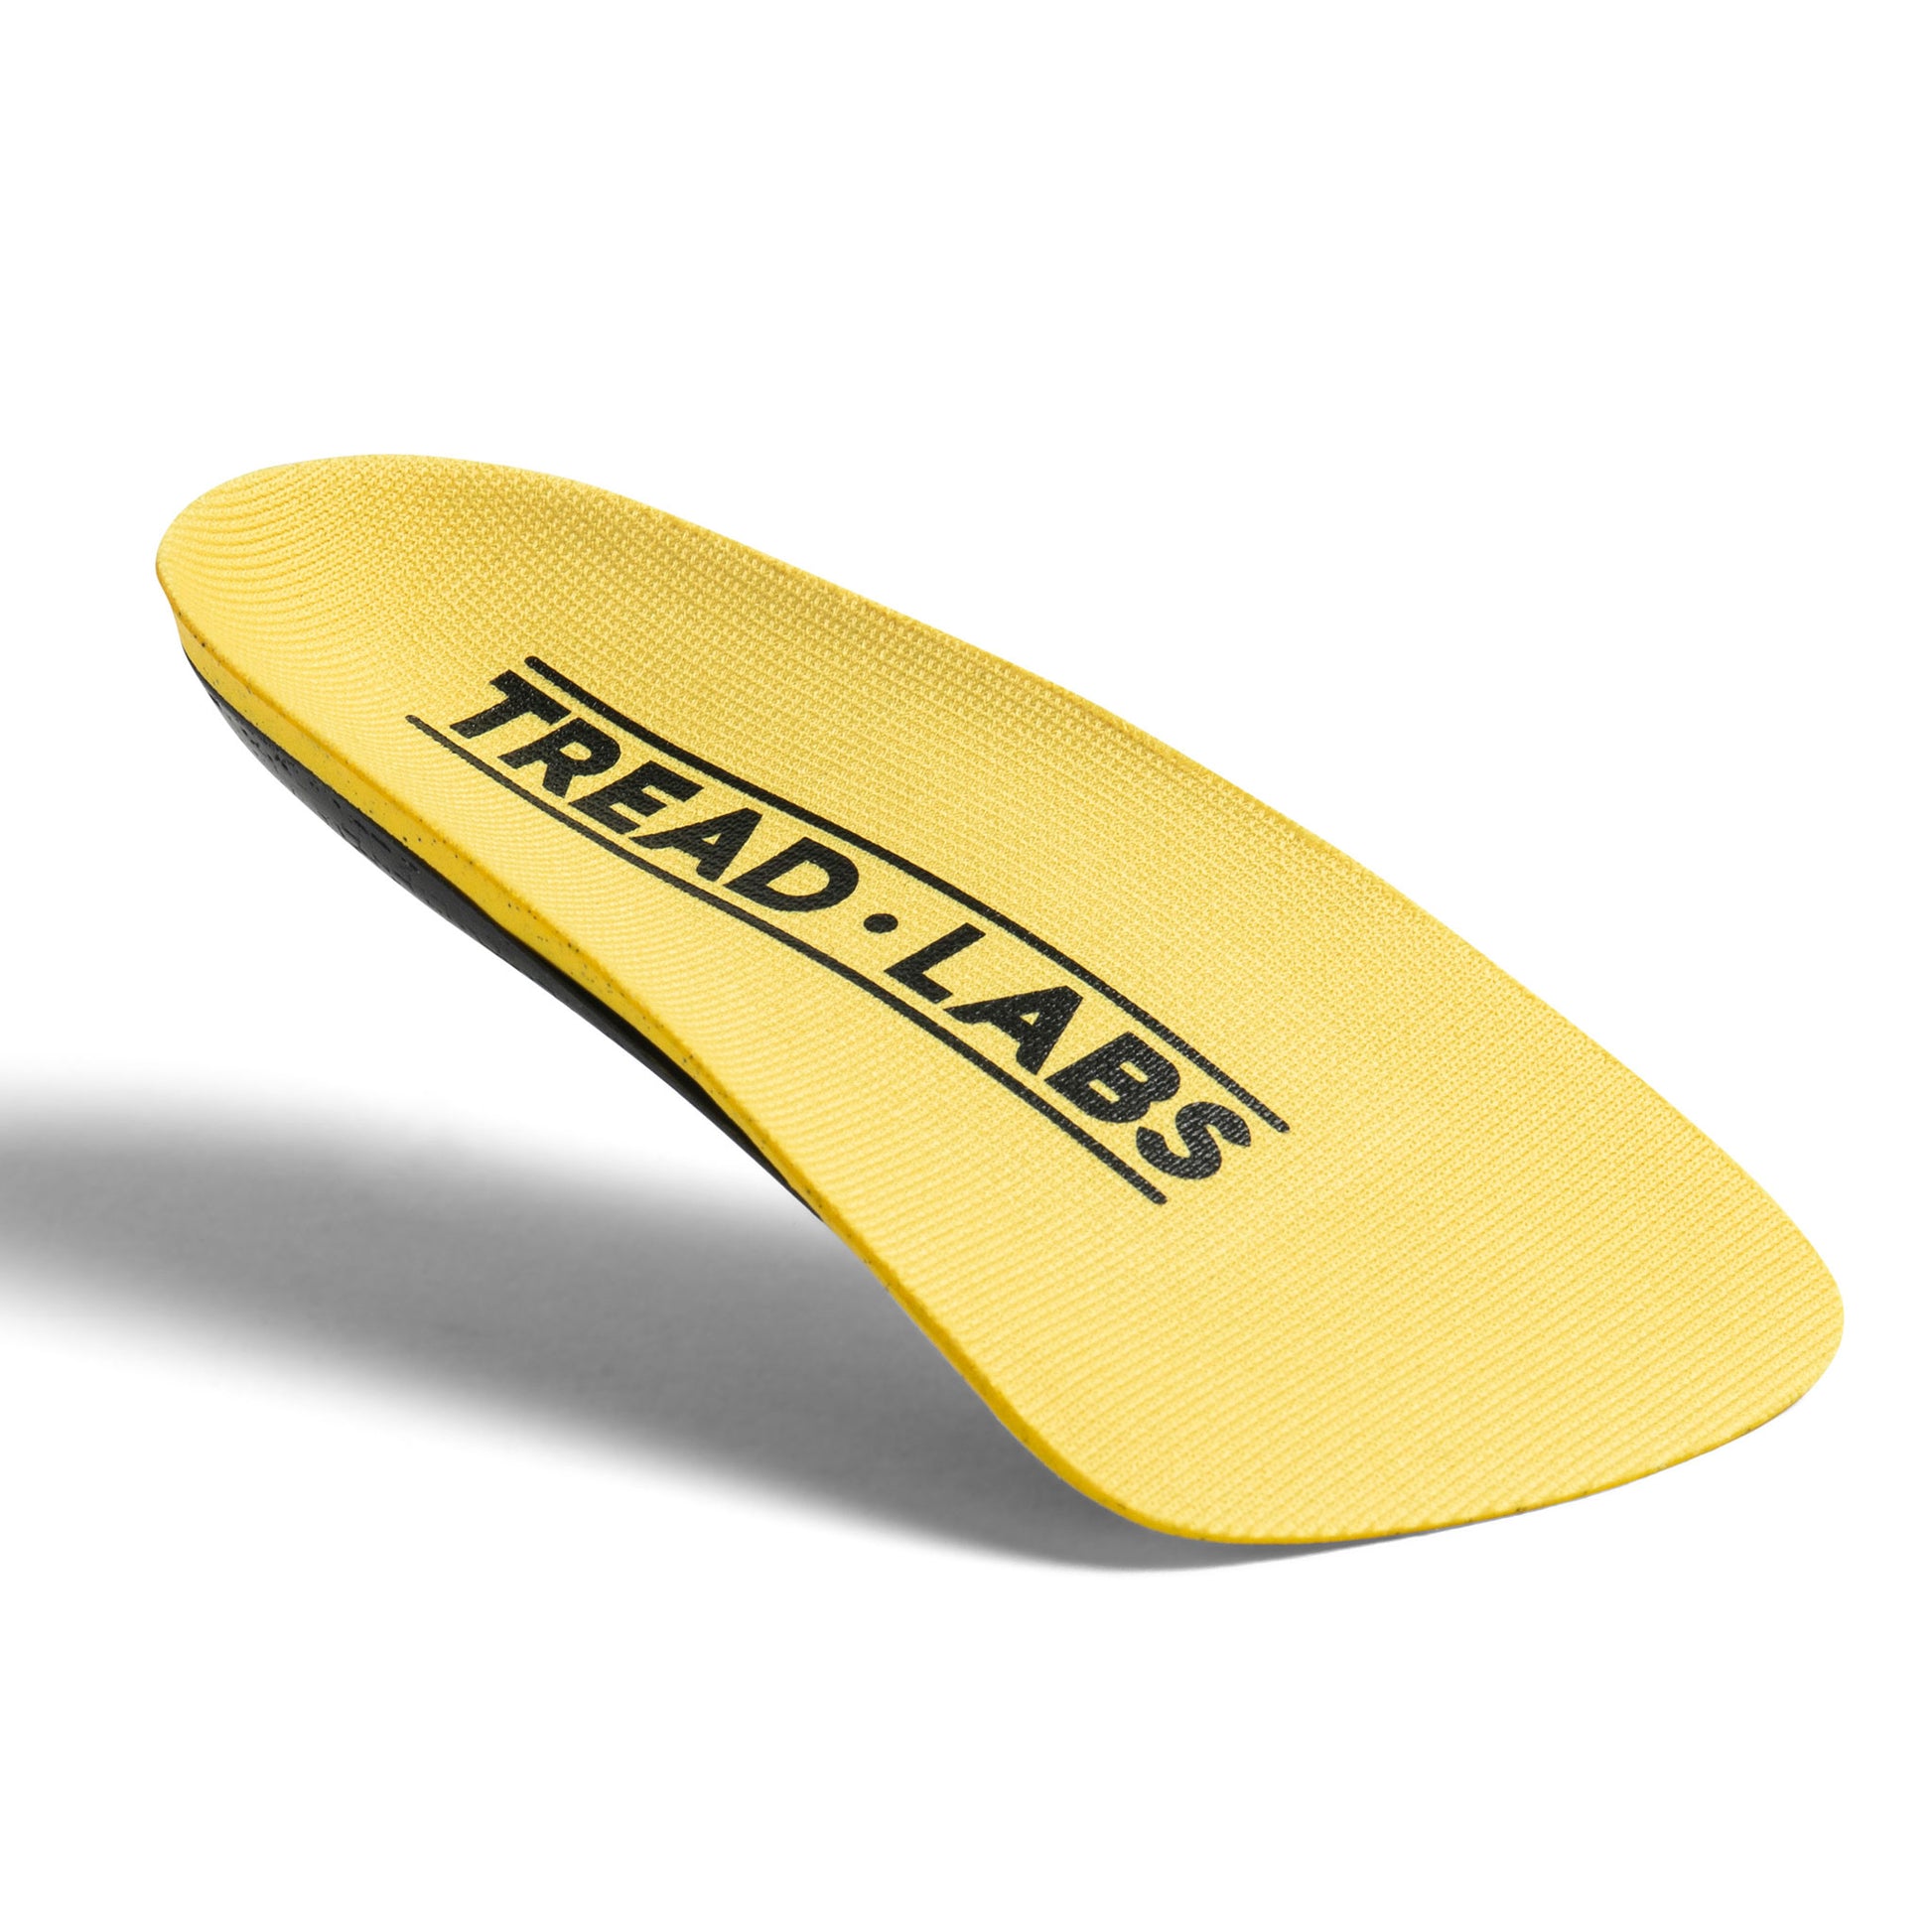 Performance Series Dash Short Insoles From Tread Labs